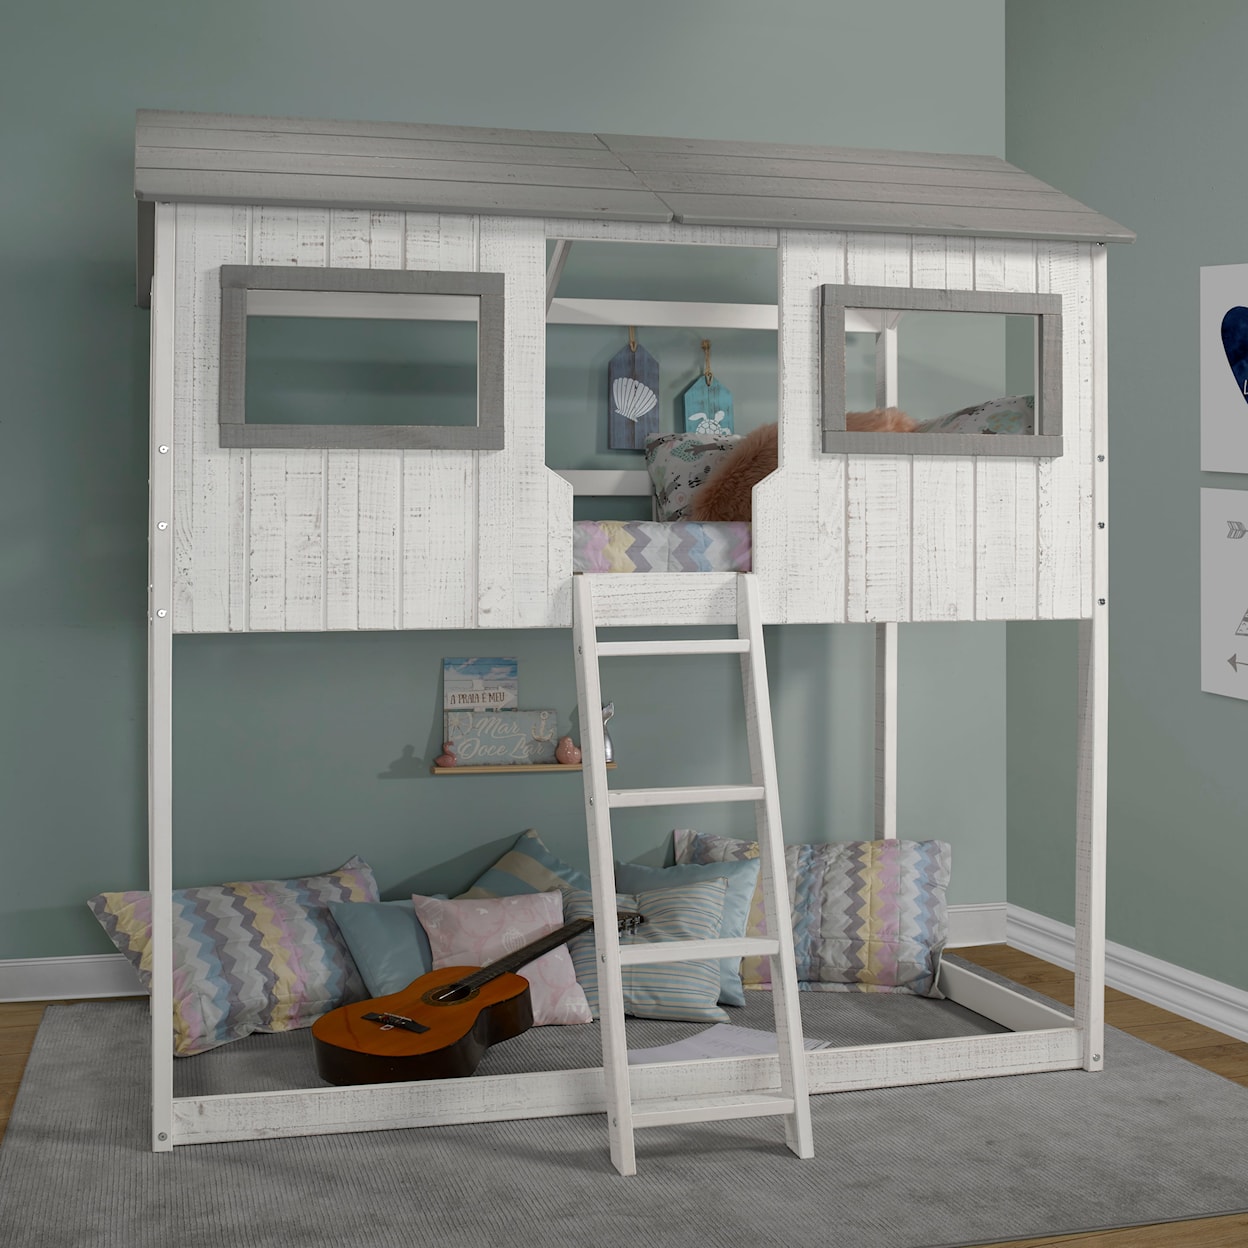 Canal House House Bunk Beds and Low Bunks Cottage House Bunk Bed